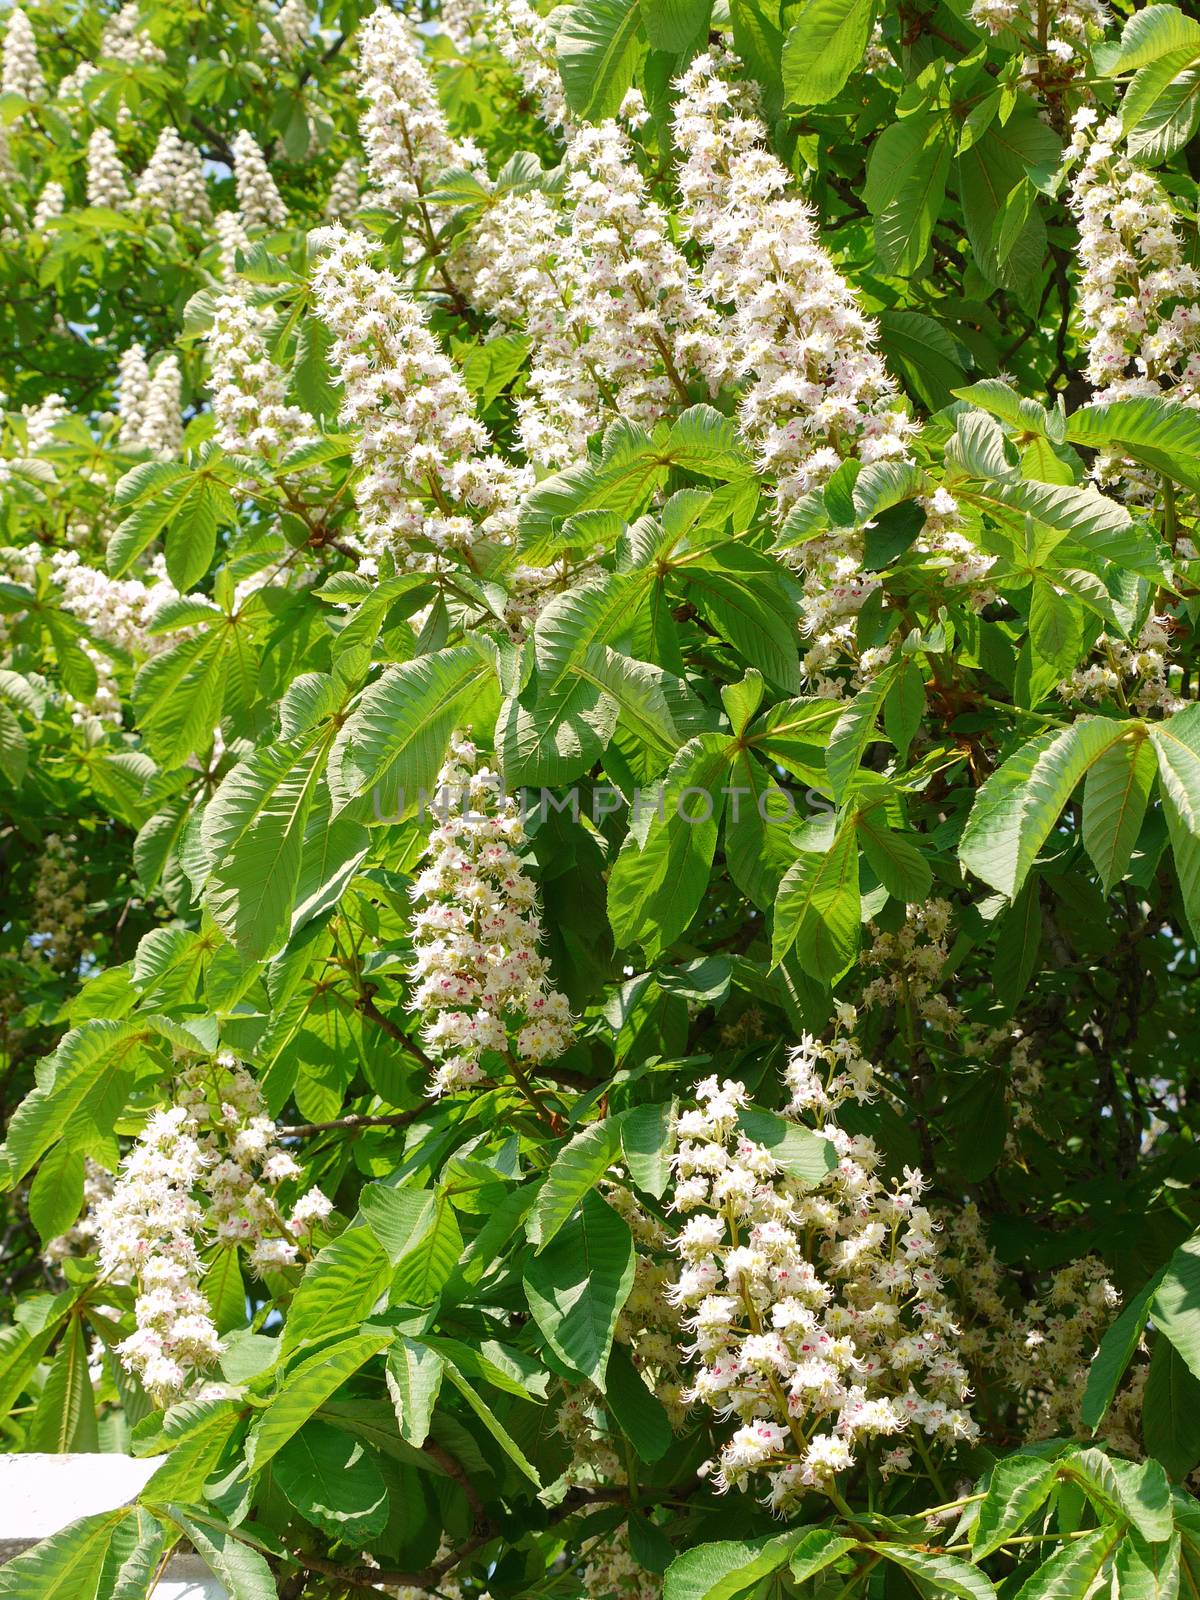 amazing white candles of blossoming chestnuts are very beautiful by Adamchuk